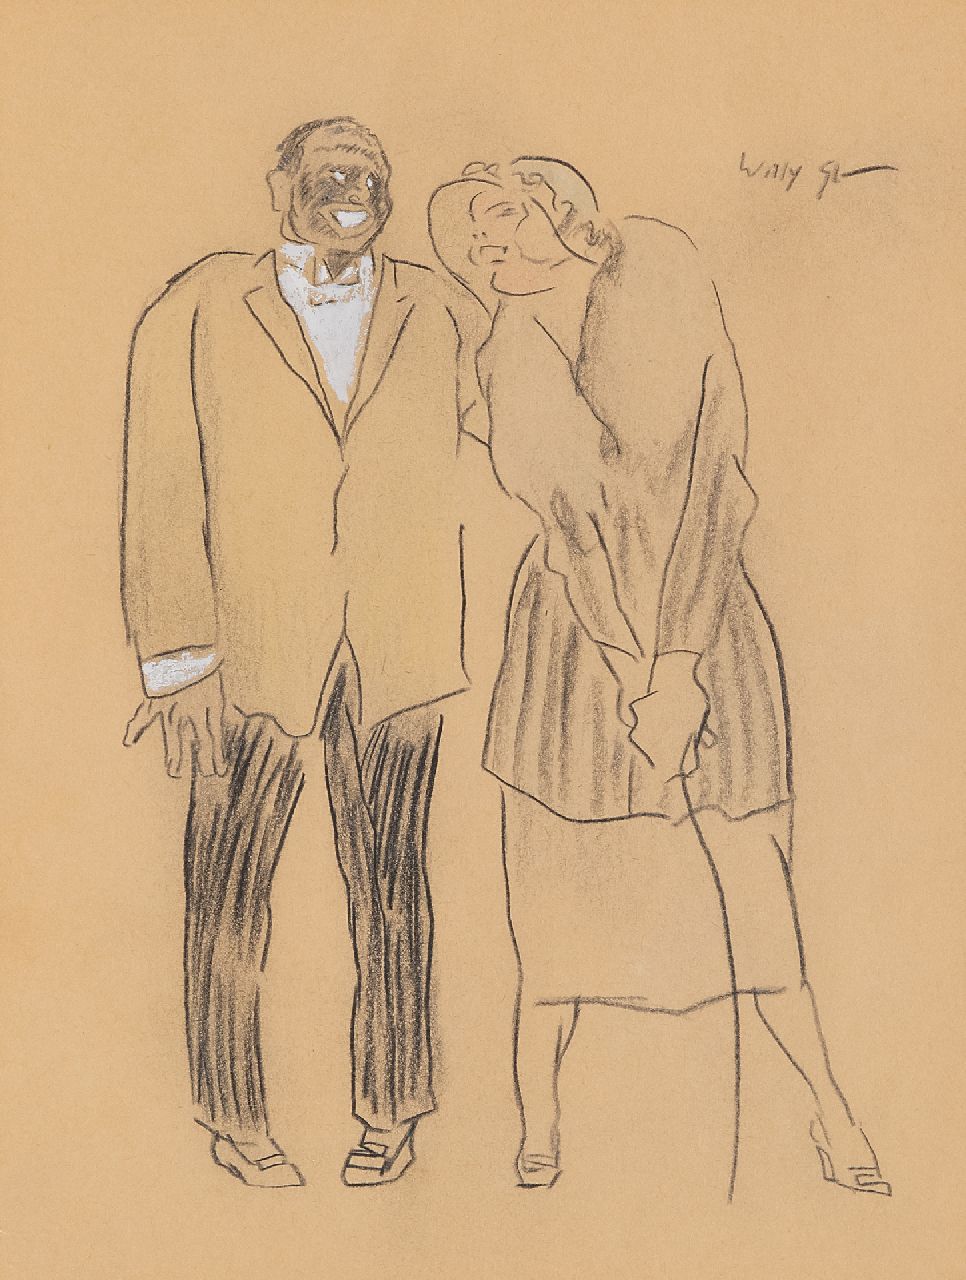 Sluiter J.W.  | Jan Willem 'Willy' Sluiter | Watercolours and drawings offered for sale | Laughing couple, chalk and gouache on paper 24.7 x 18.1 cm, signed u.r.